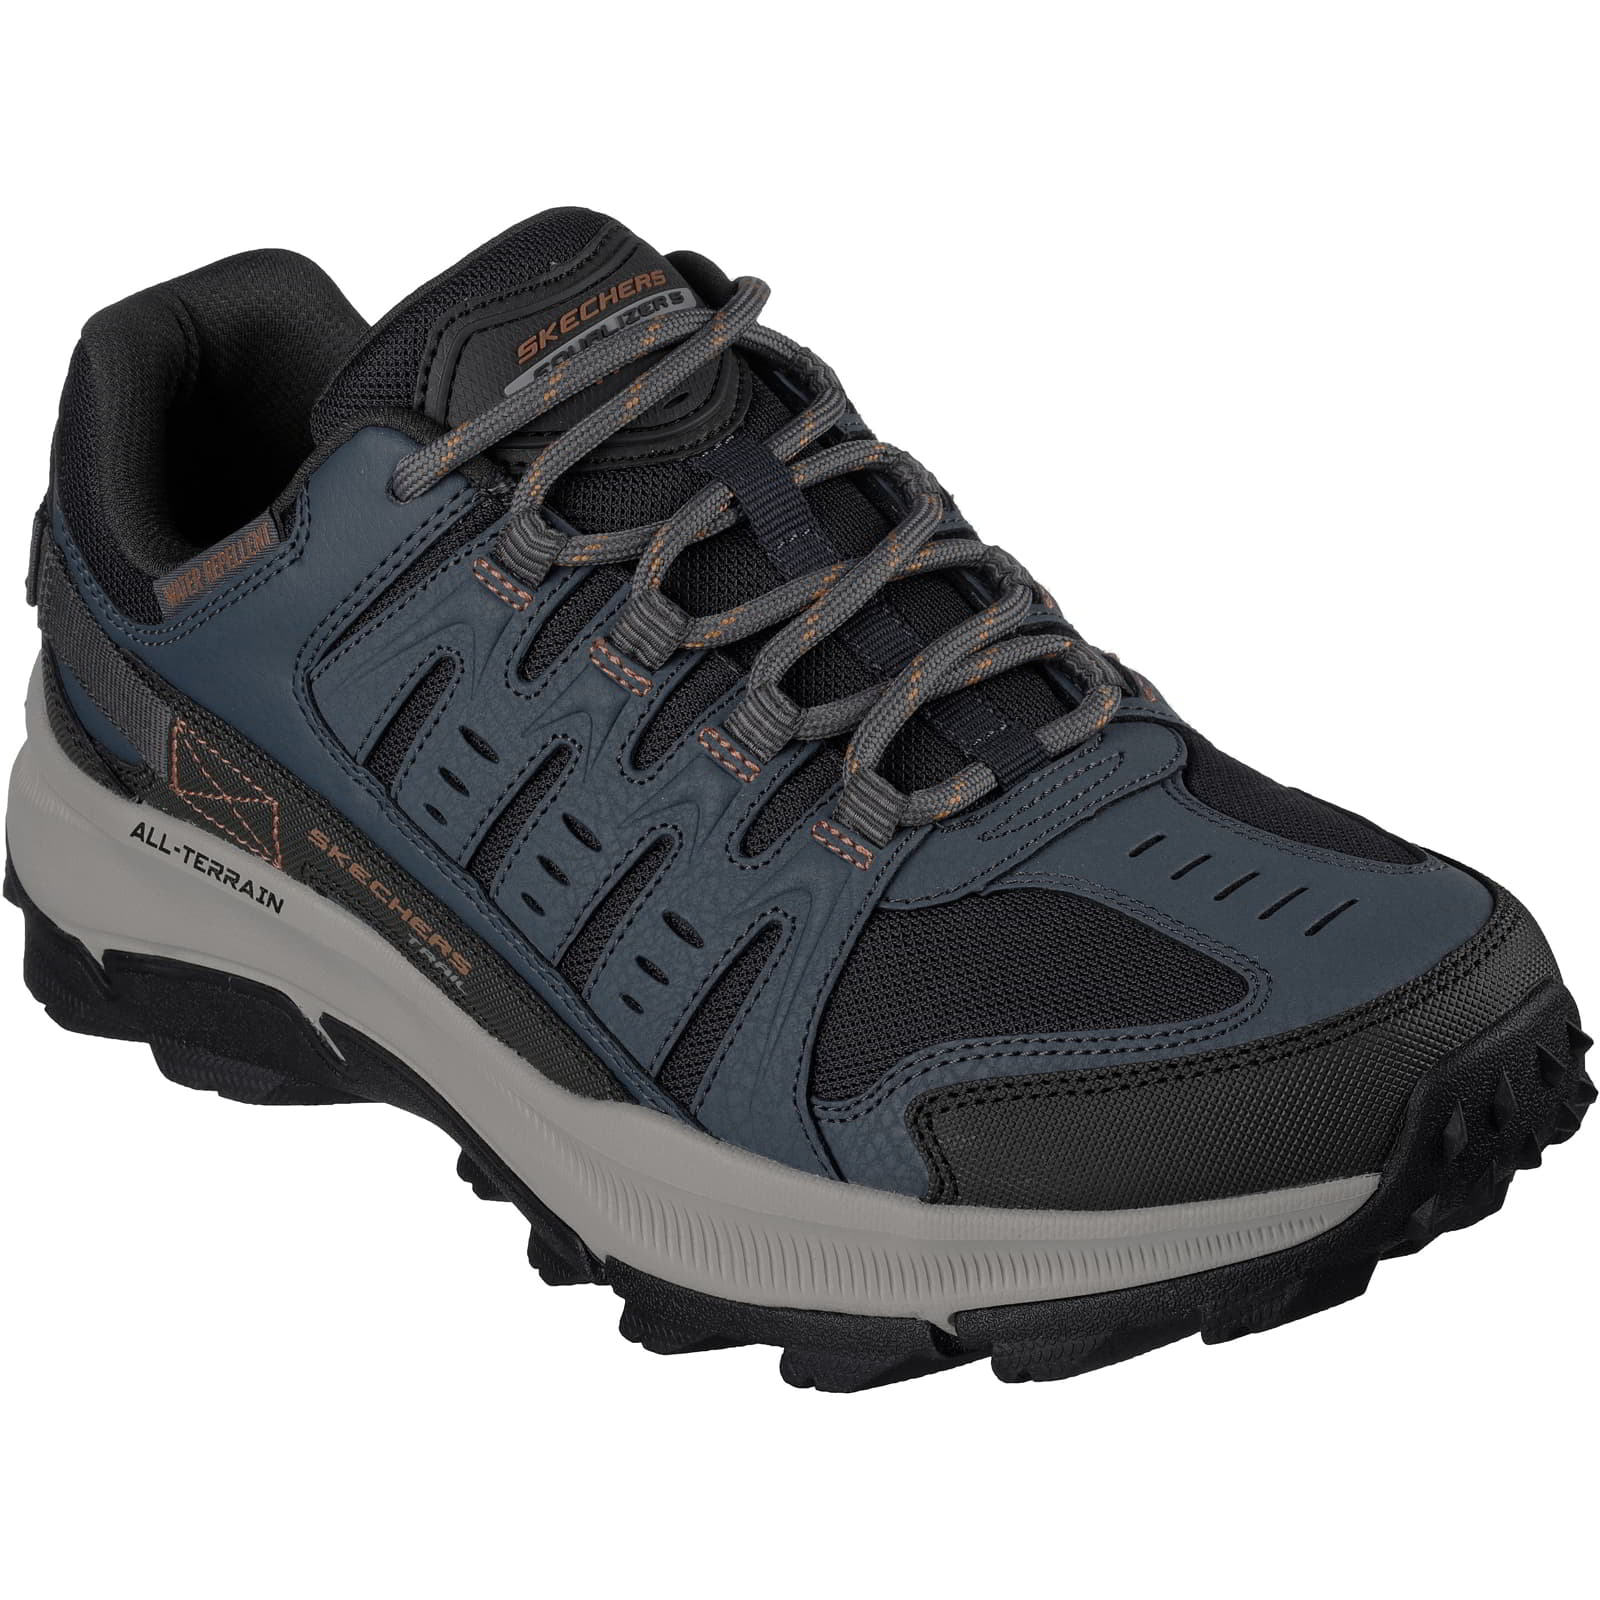 Skechers Men's Equalizer 5.0 Trail Water Repellent Walking Shoes Trainers - UK 10